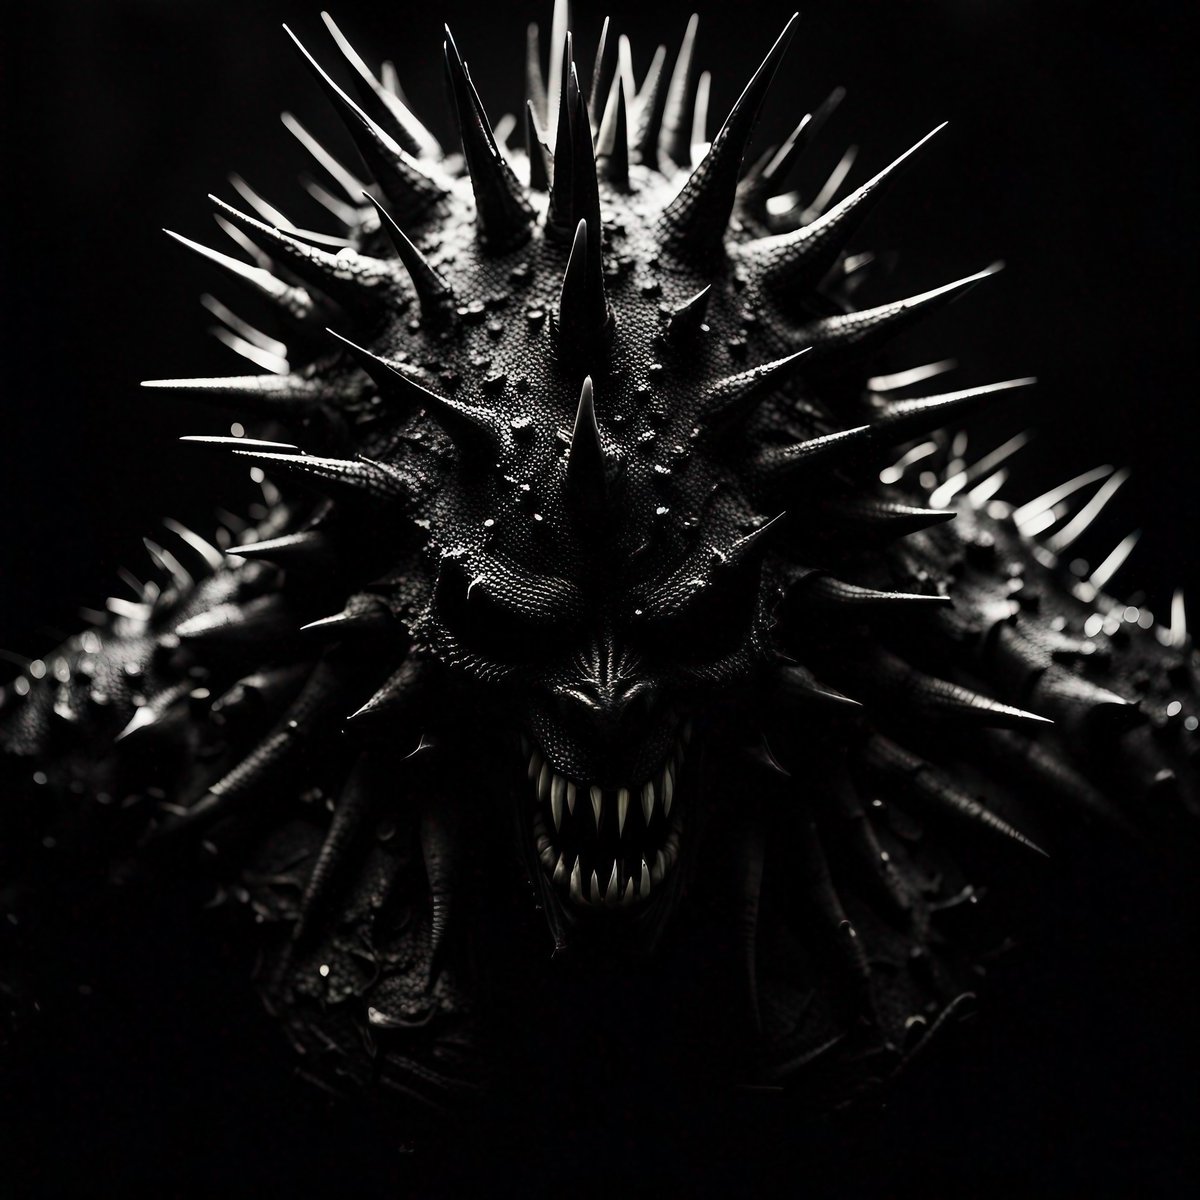 A gateway to a world between the deadly beautiful and the unknown. 
#darkness #monster #art #deathcore #raycollins #nathanwirth #sebastianerrazuriz #solarization #spikes #SDXL #aiartcommunity #aiartwork #painting #illustration #digitalart #aiartdaily #digitalphotoart